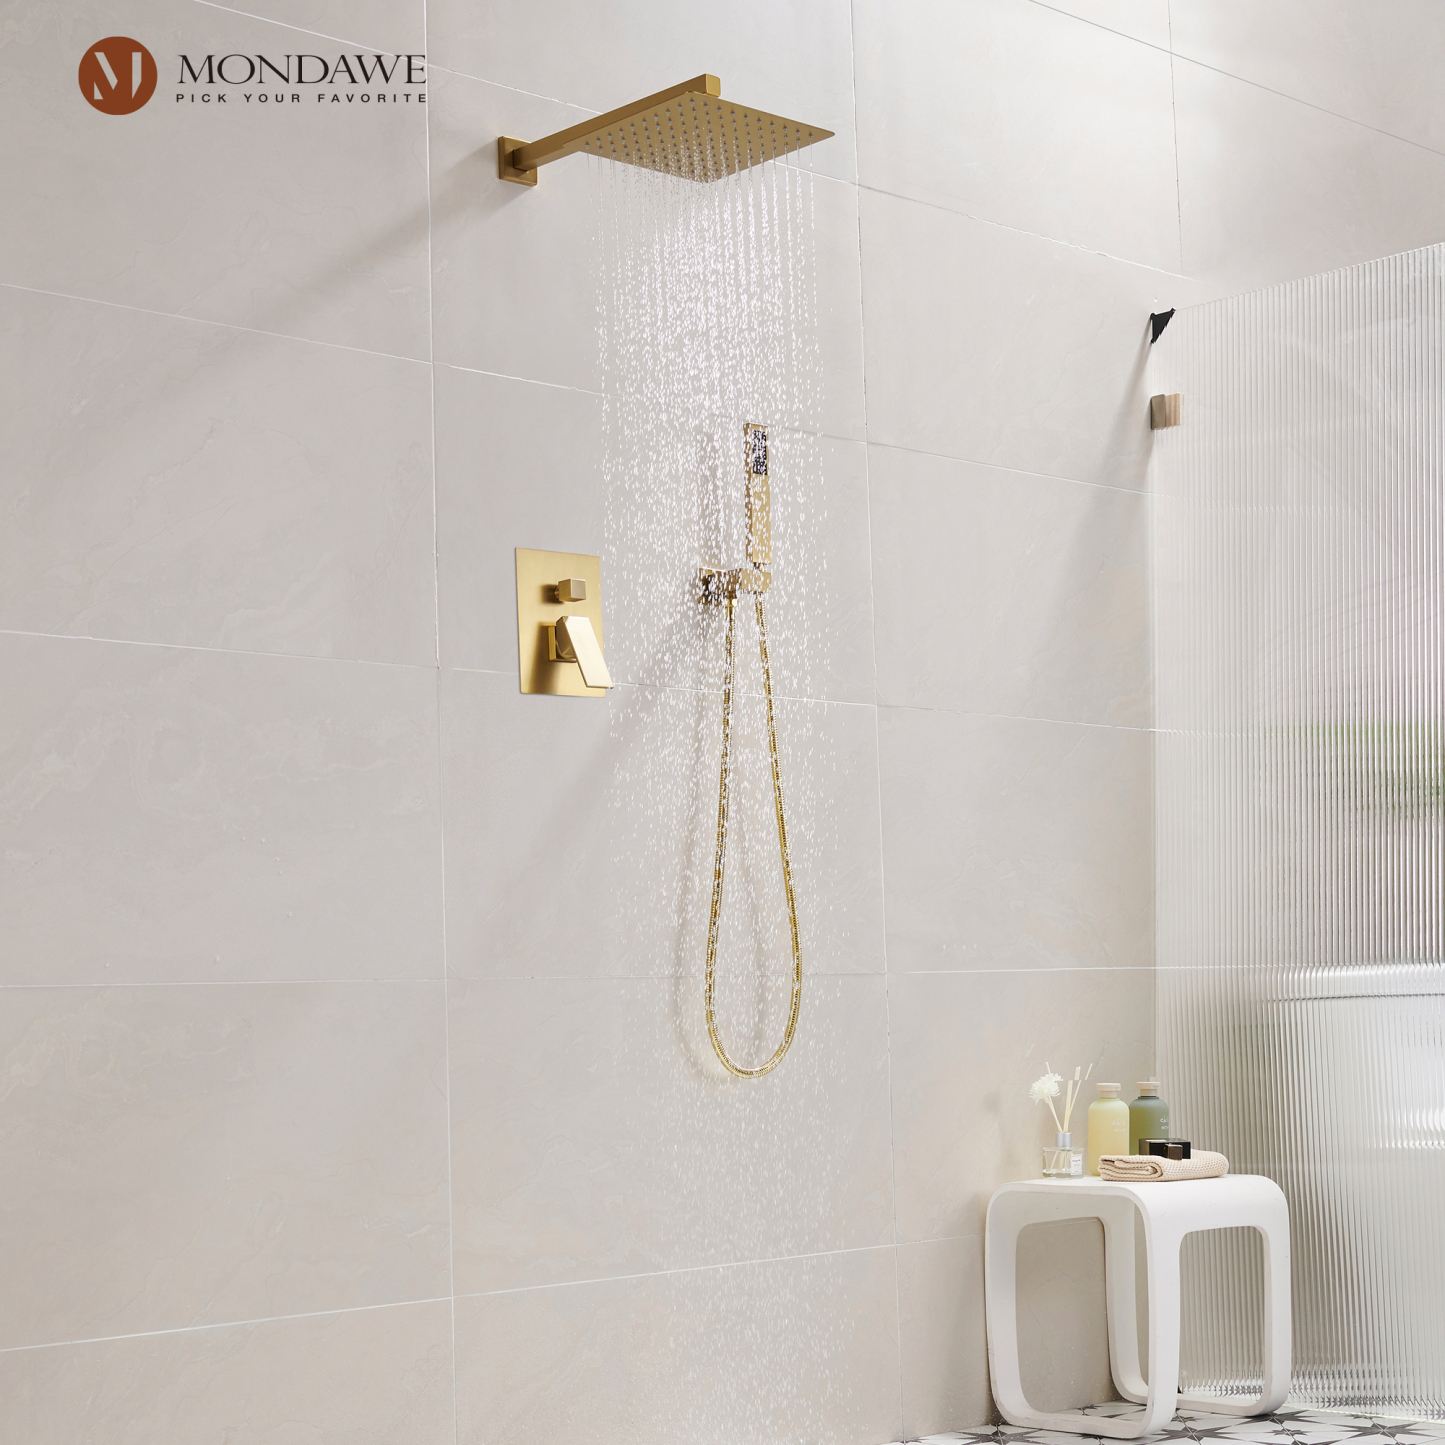 Mondawe 2 Functions Wall Mount Square Complete Shower System (Rough-In Valve Included)-Mondawe